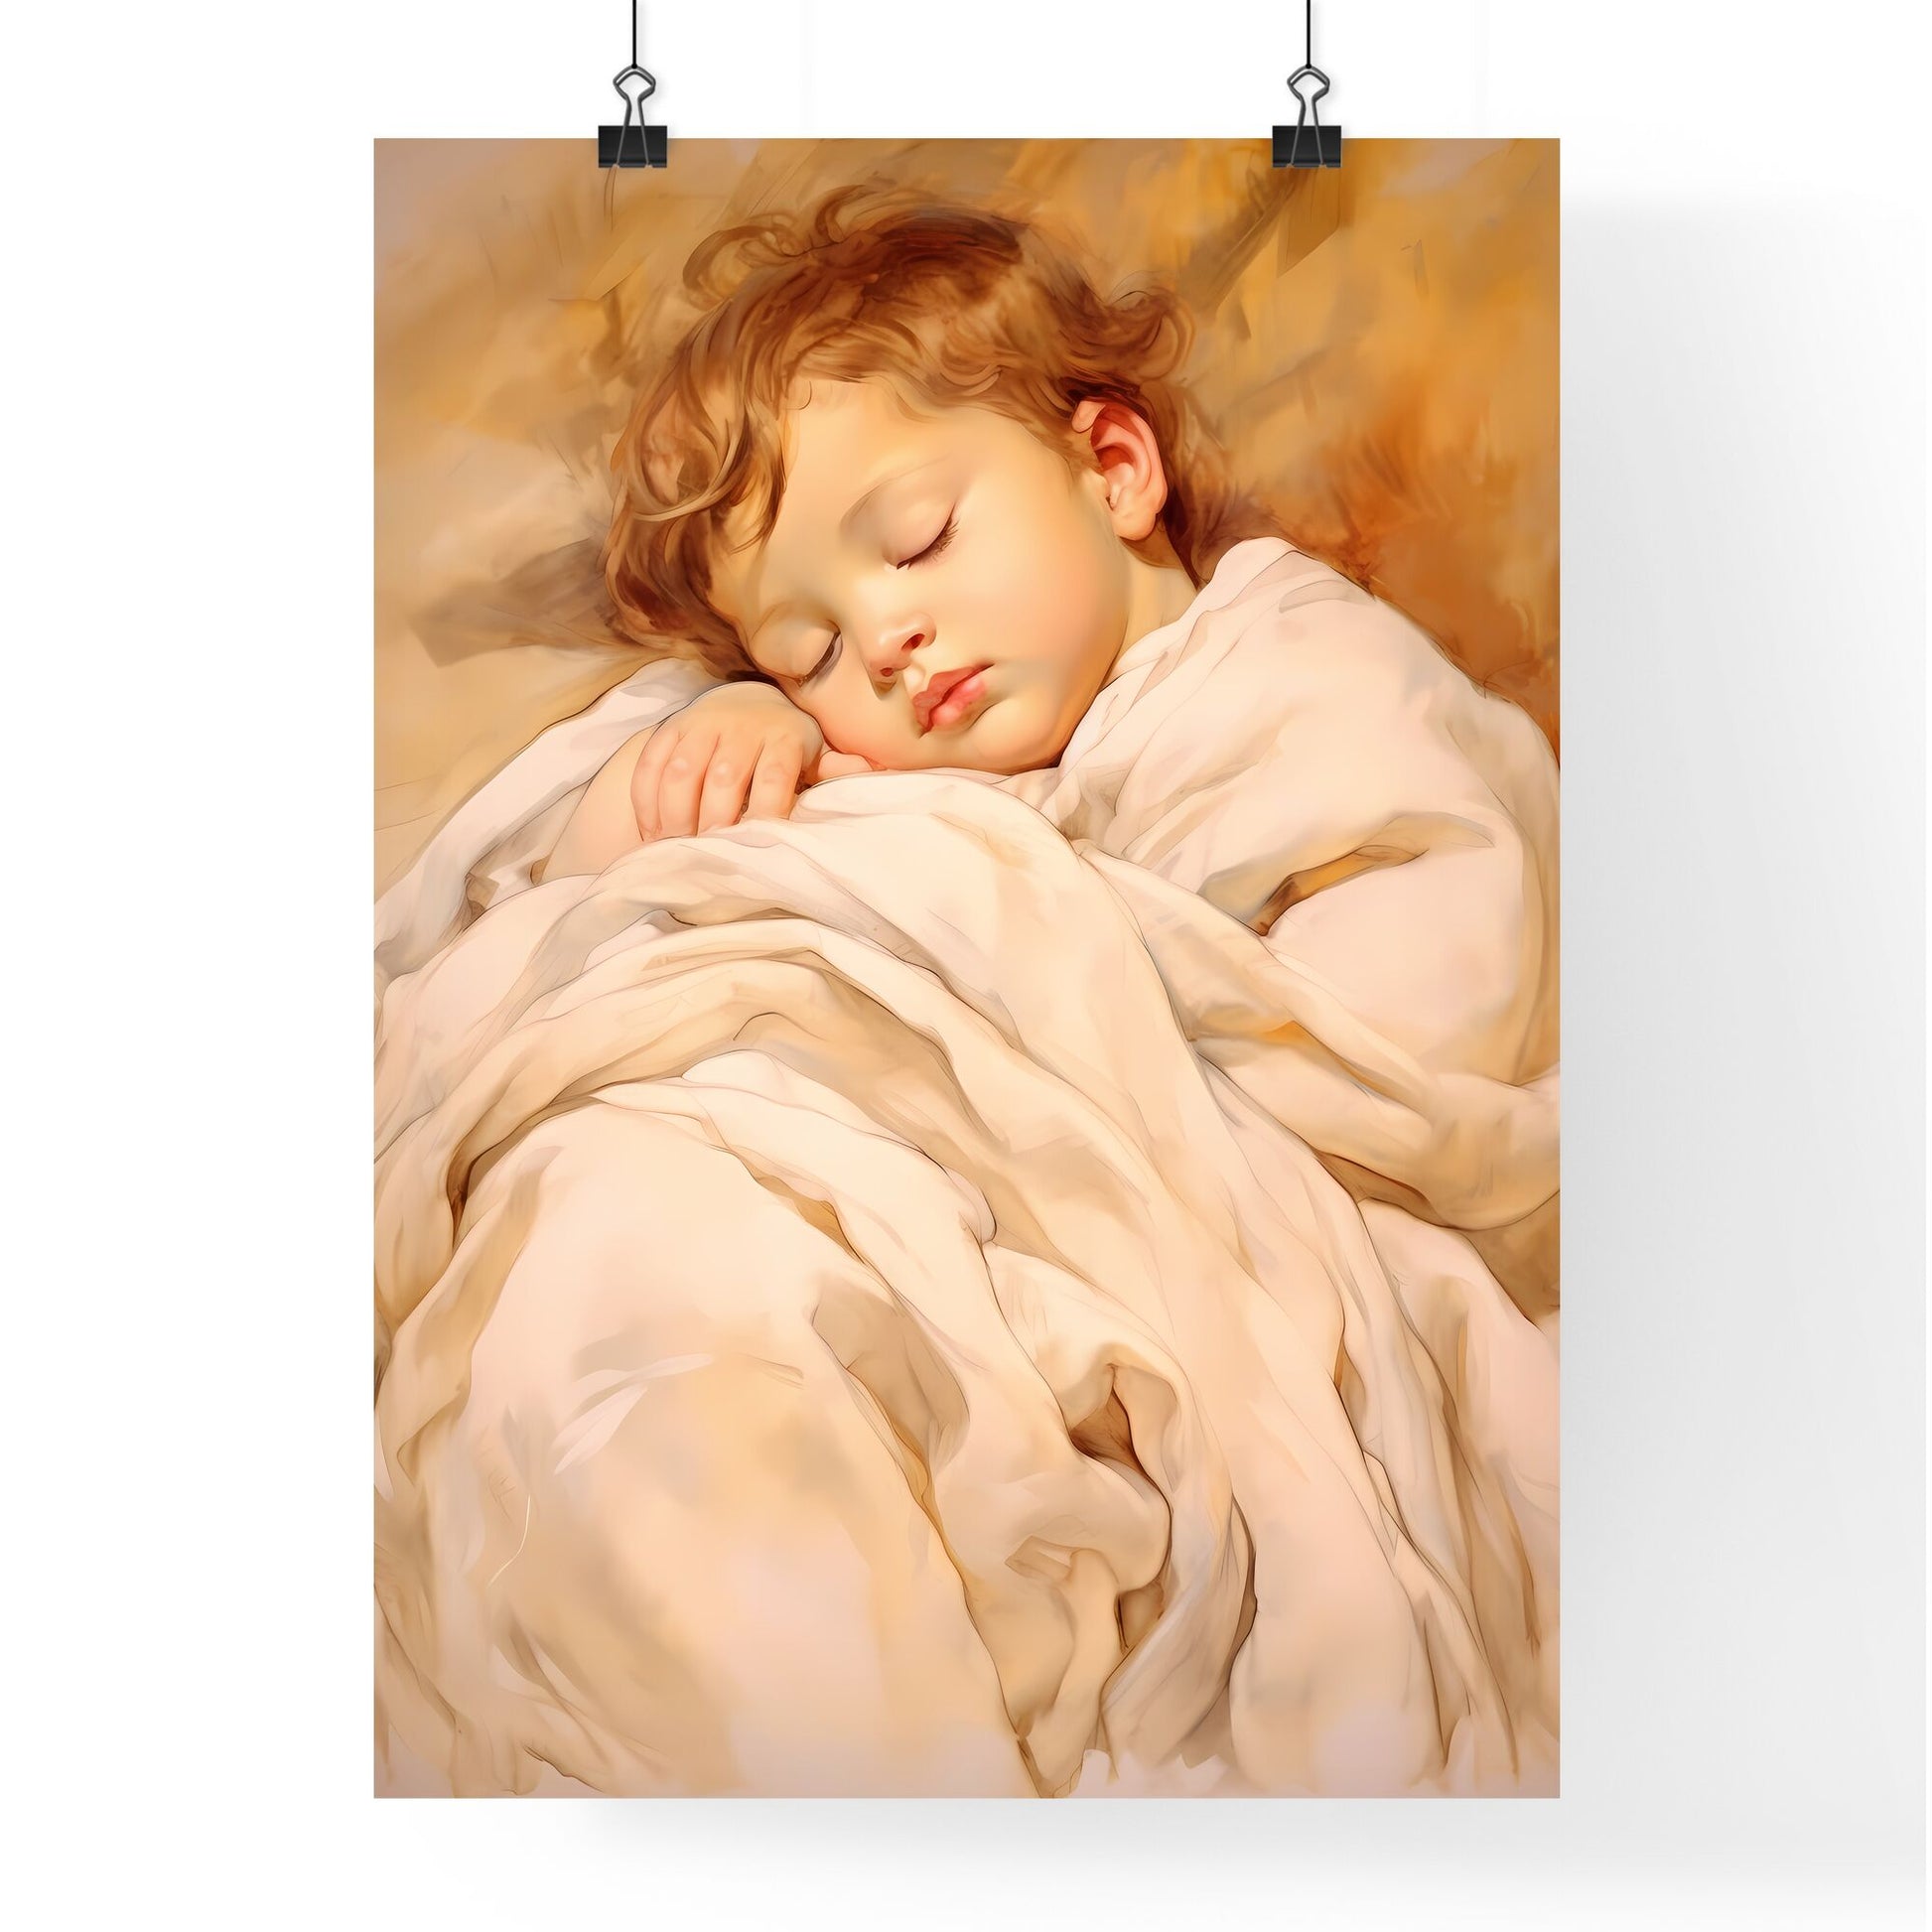 A Poster of baby sleeping in a white blanket - A Child Sleeping In A Blanket Default Title